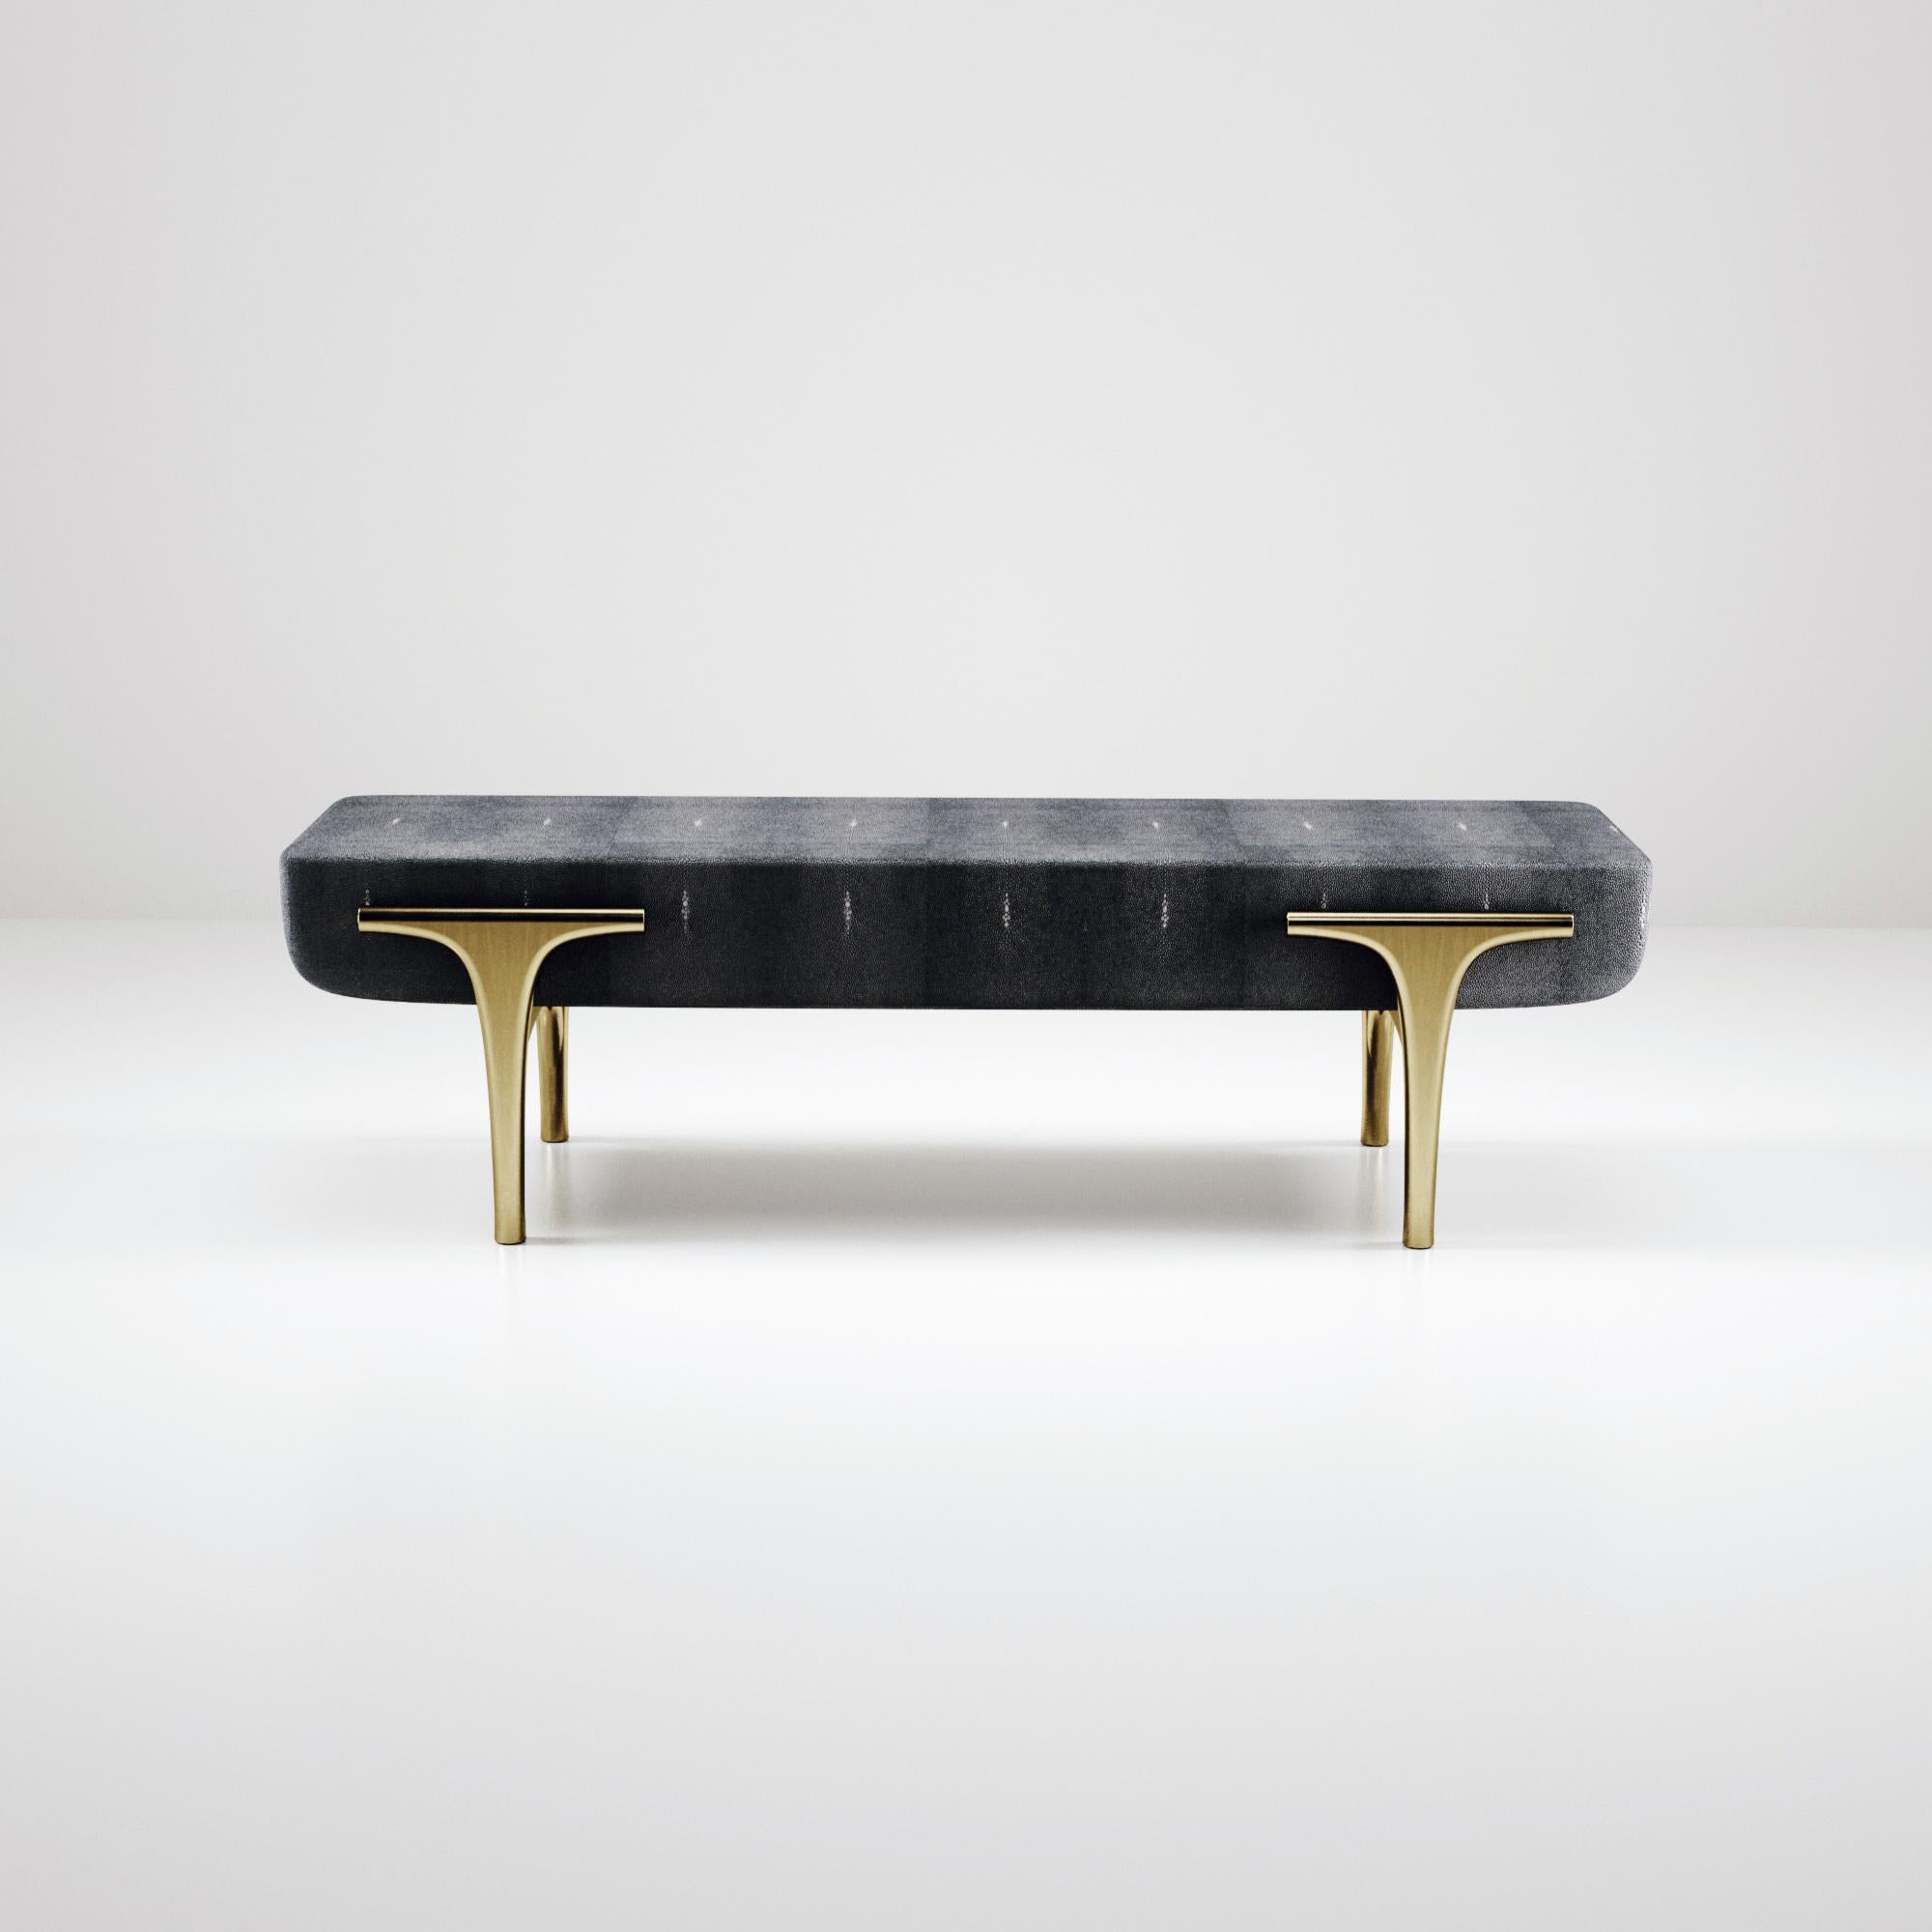 The Ramo bench by R & Y Augousti is an elegant and versatile piece. The coal black shagreen inlaid piece provides comfort while retaining a unique aesthetic with the bronze-patina brass frame and details. This listing is priced for shagreen inlay,